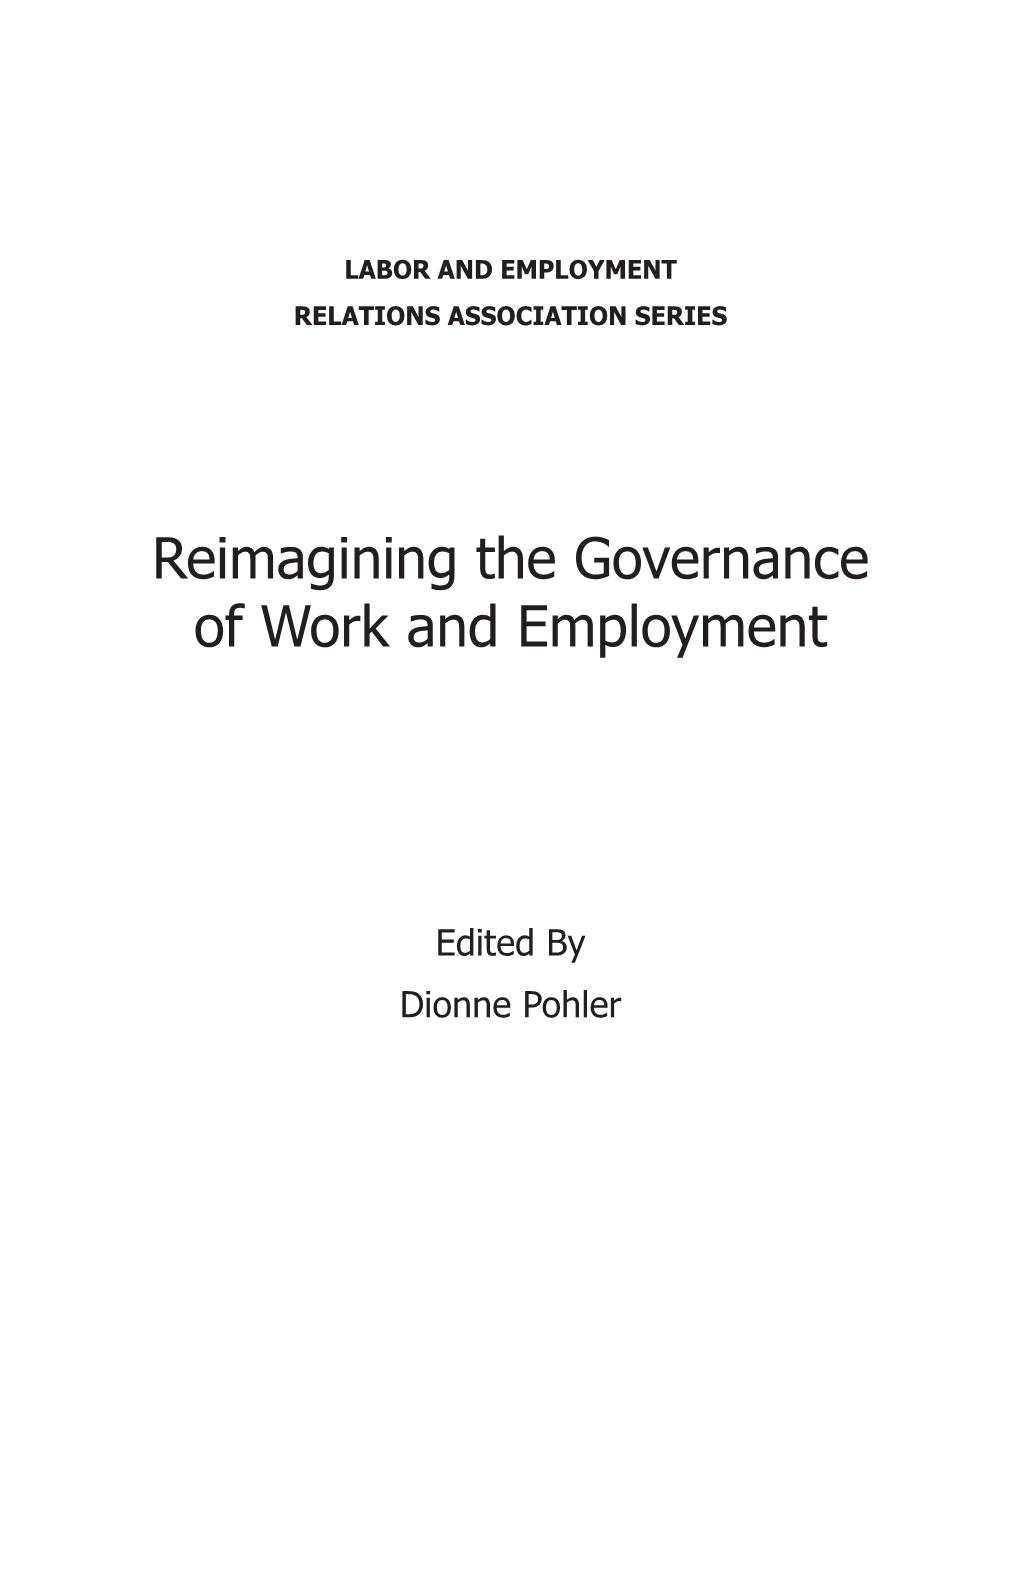 Reimagining the Governance of Work and Employment